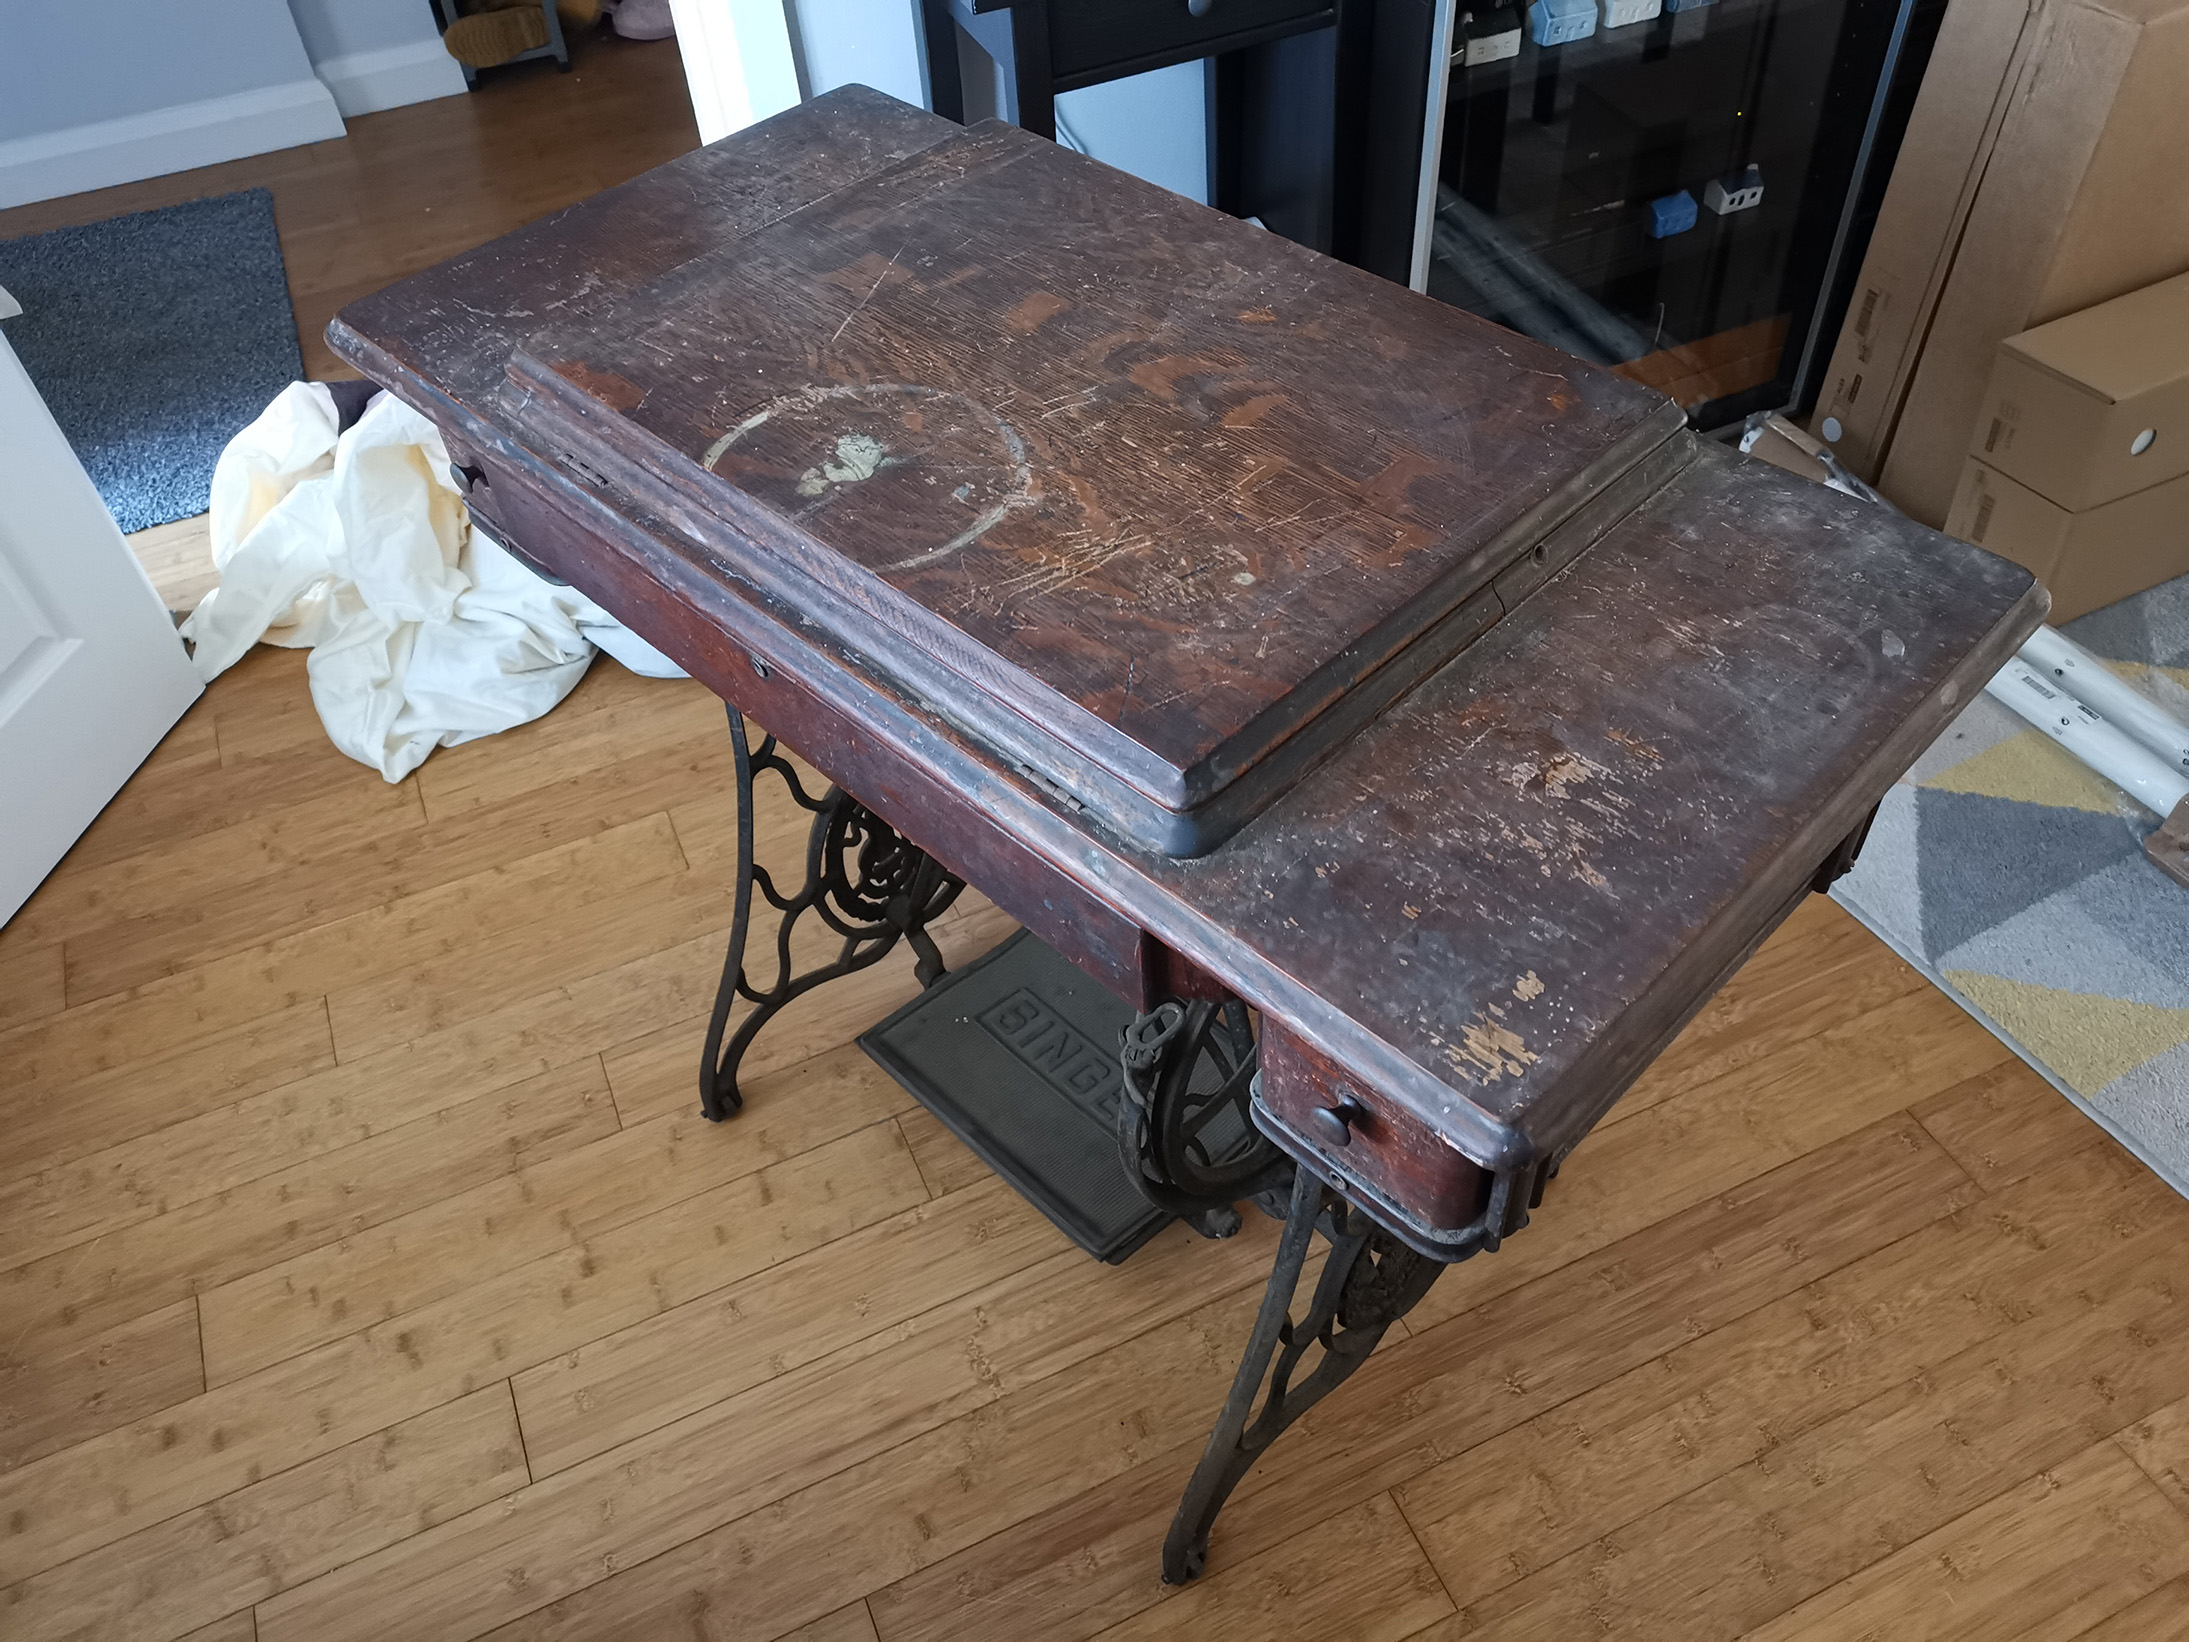 Refinishing an antique sewing machine table - by Glenn Huovinen